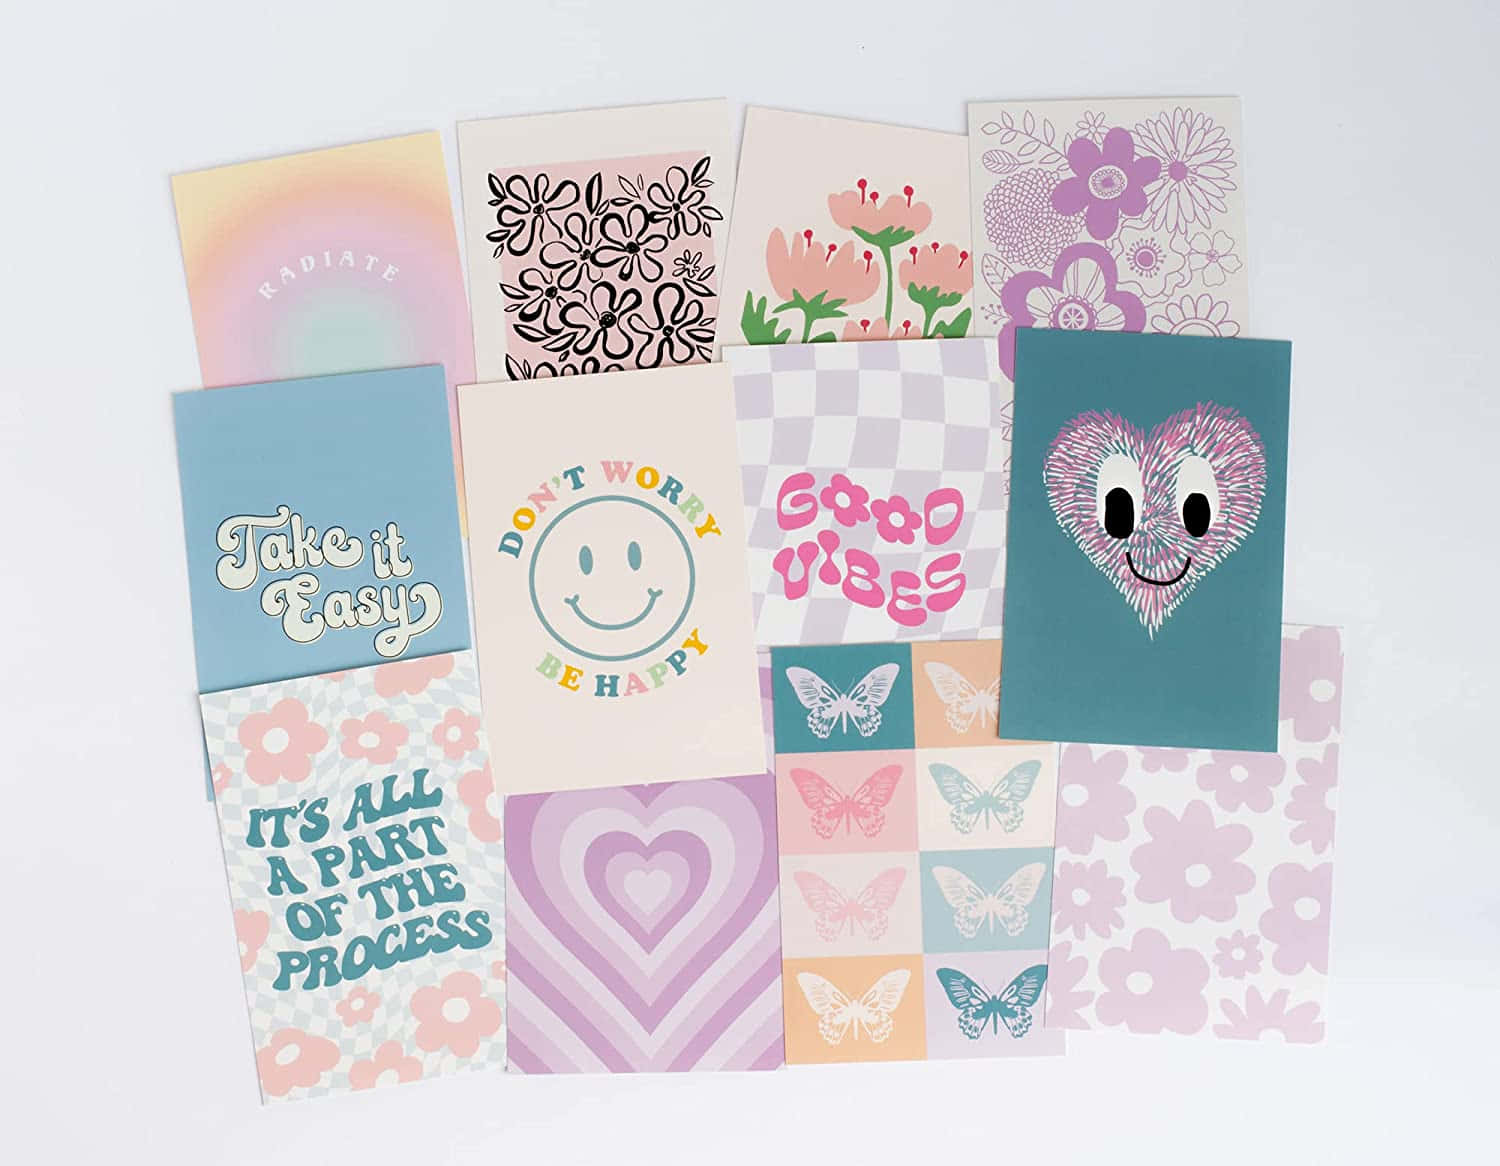 A Collection Of Colorful Cards With A Heart On Them